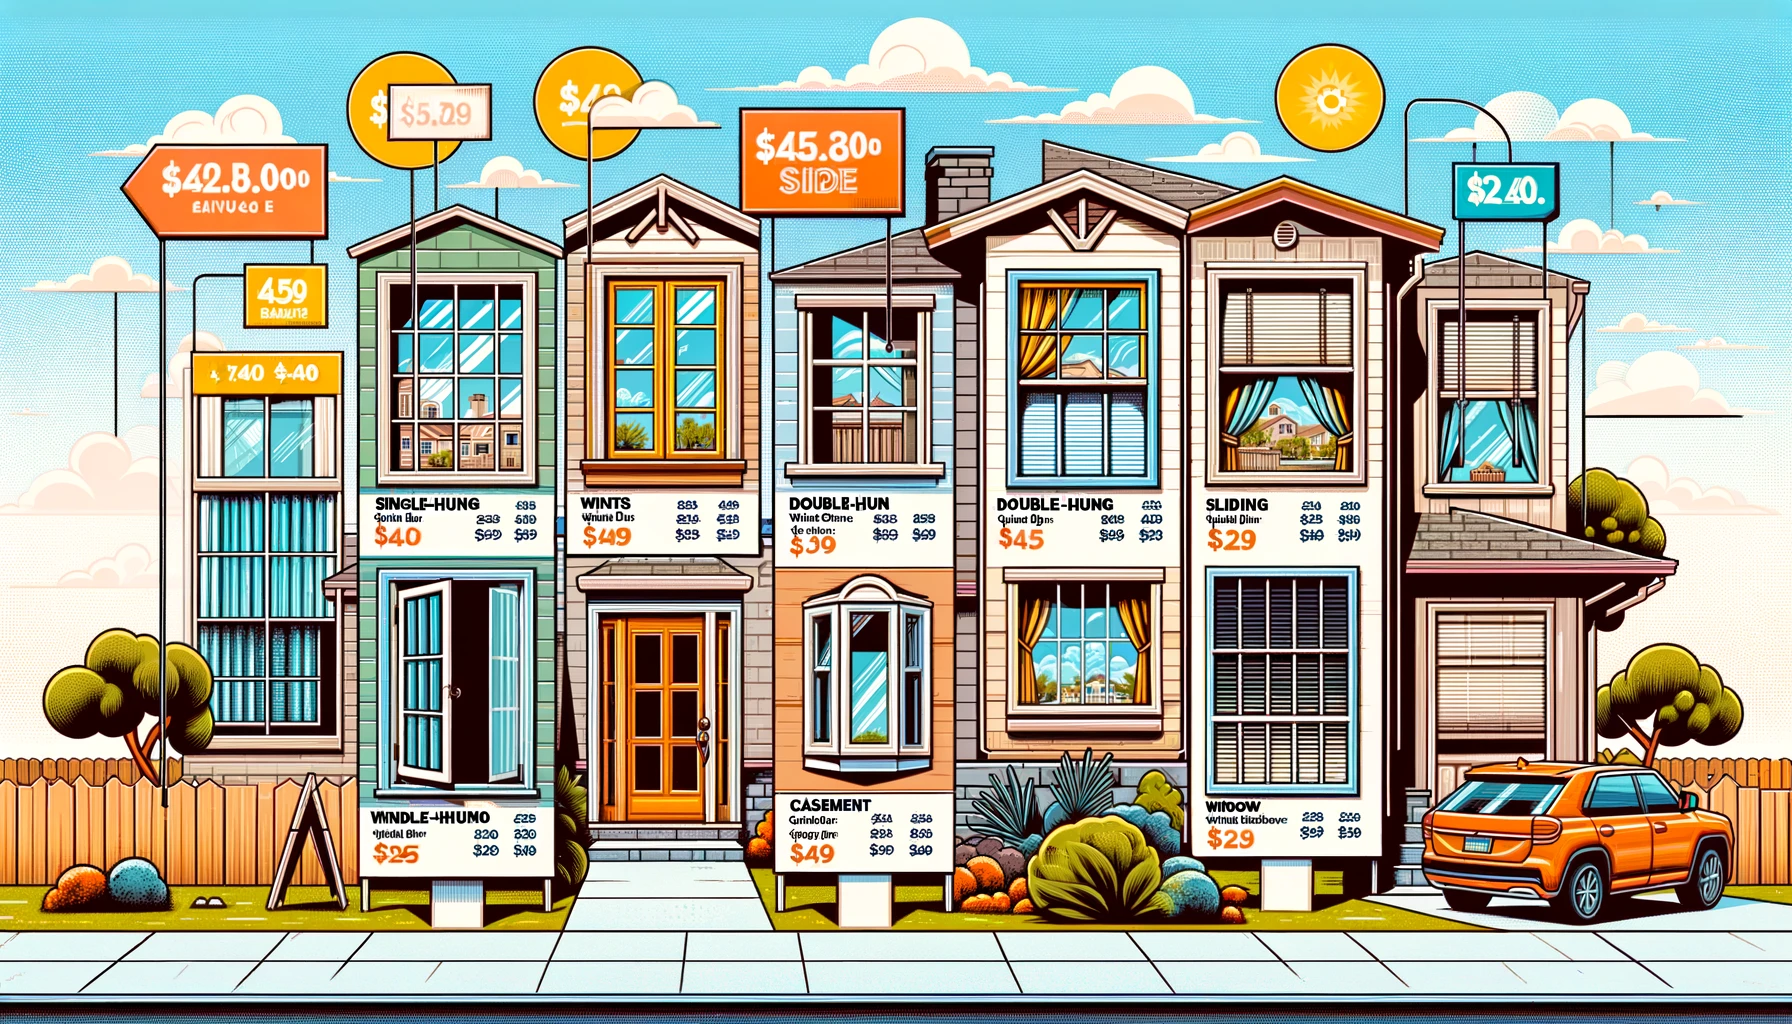 An infographic depicting various window styles and their costs in San Diego, set against a backdrop of local homes and palm trees.